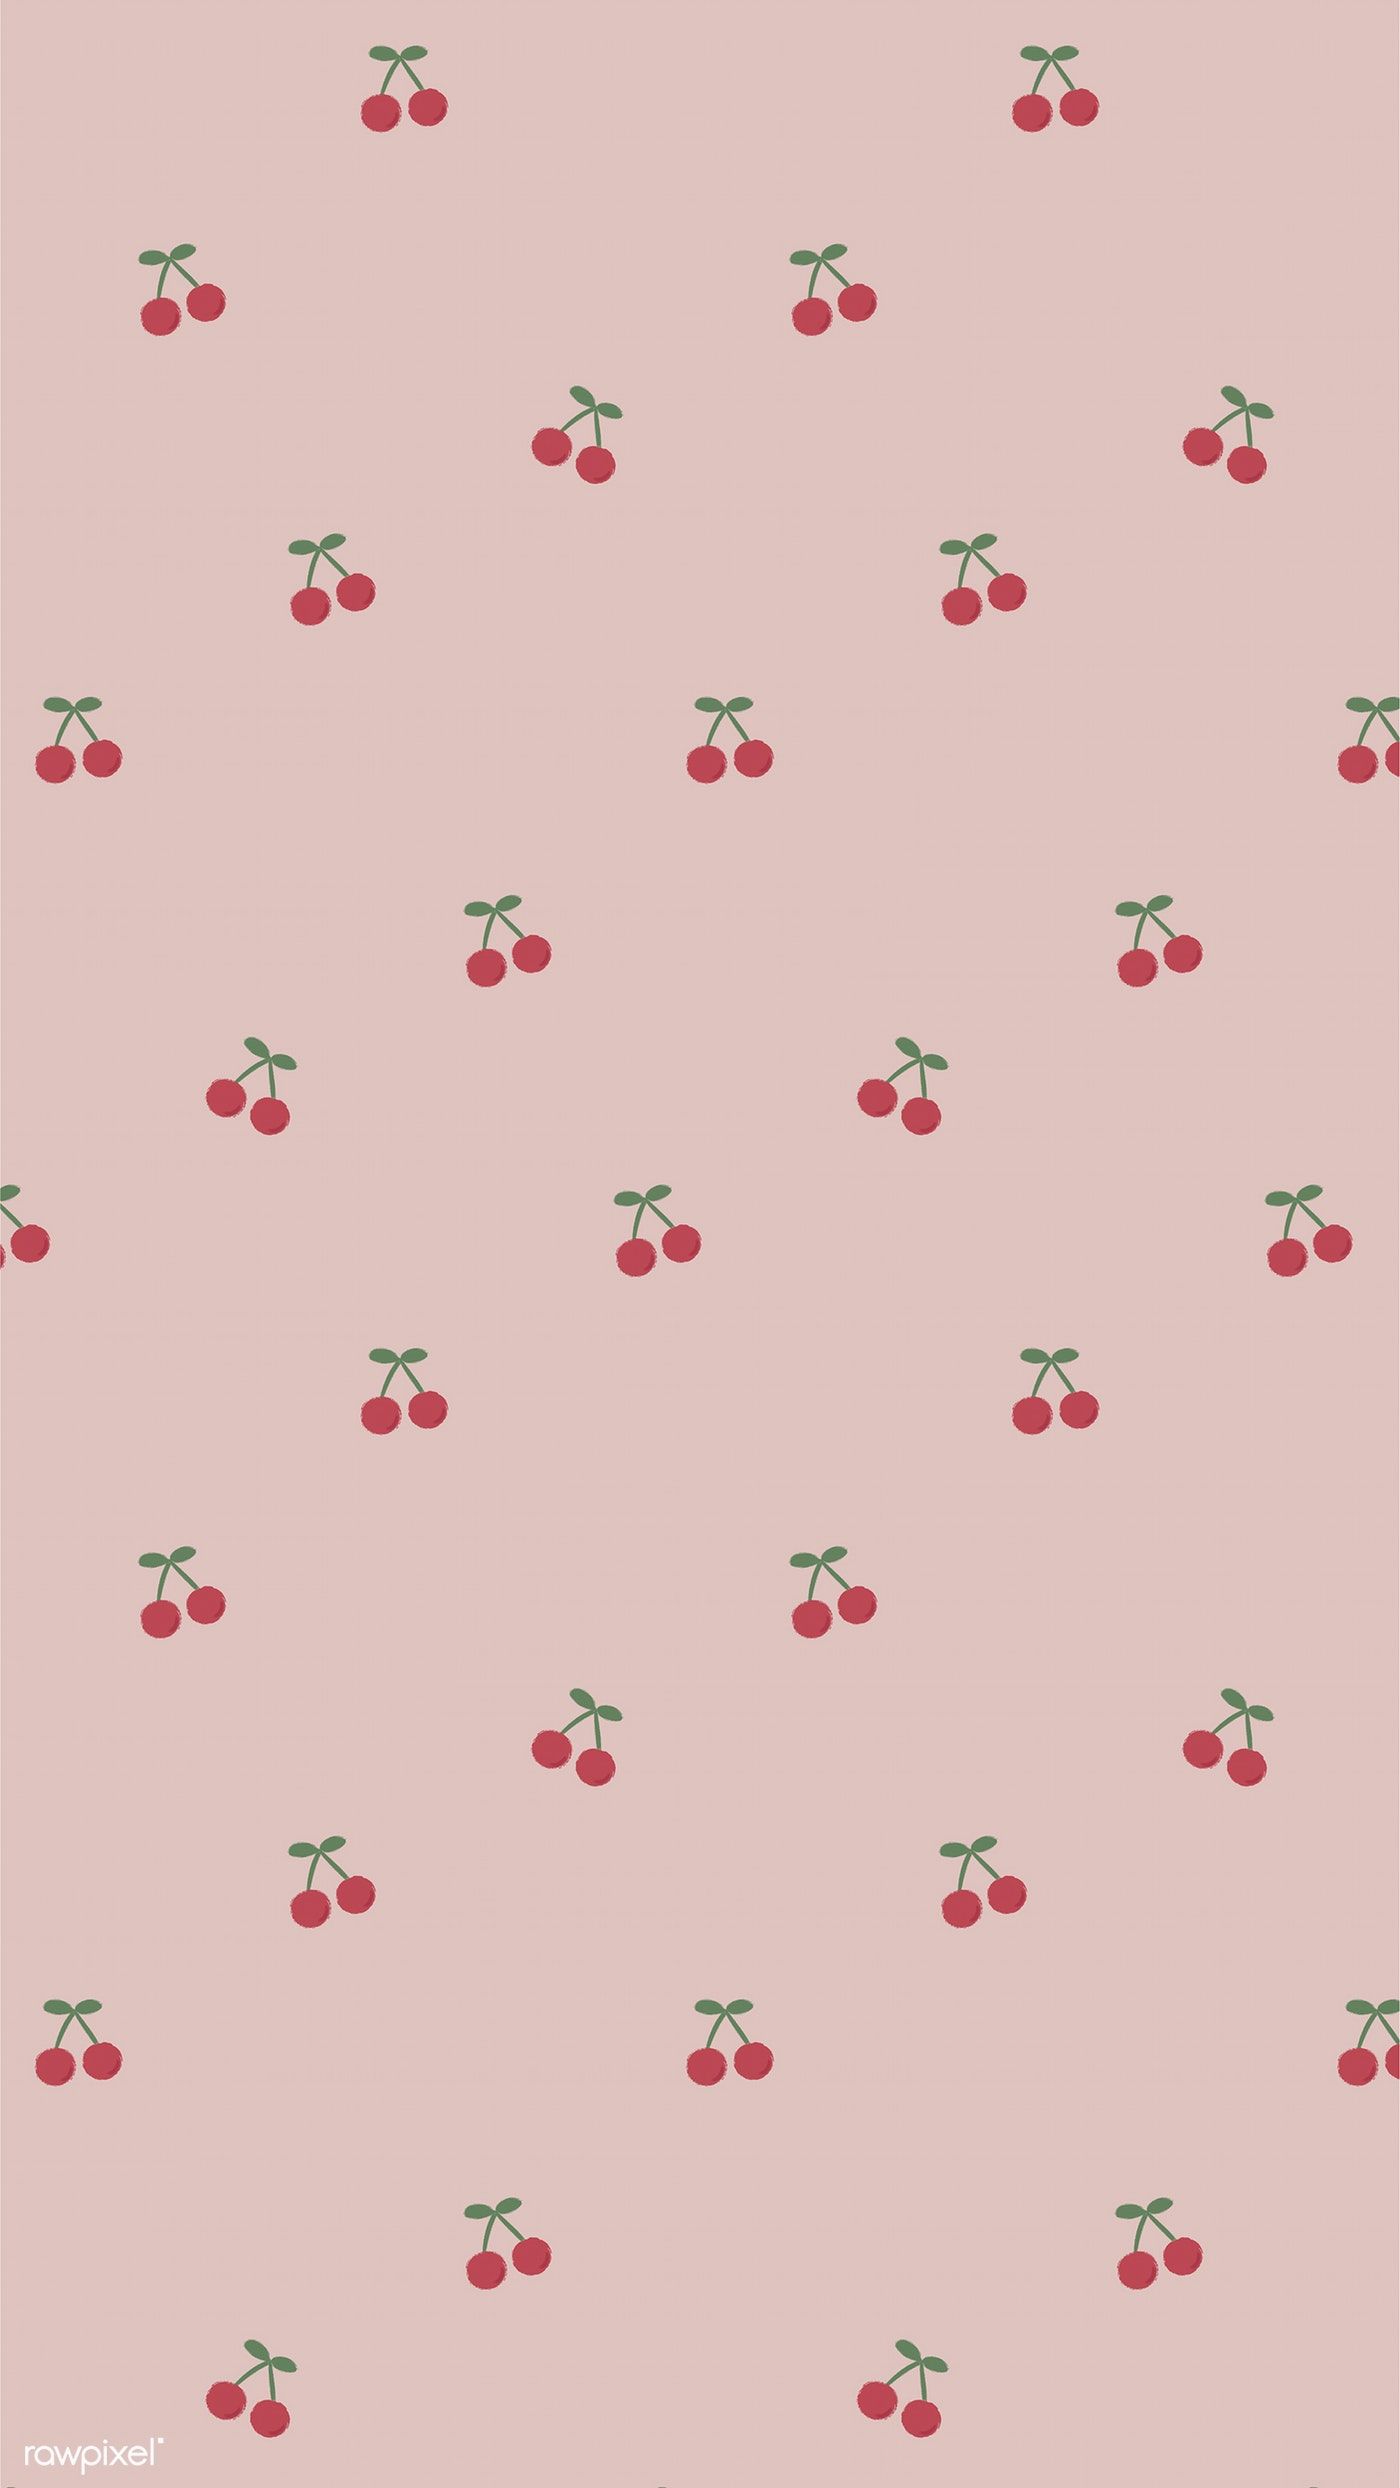 Download premium image of Red hand drawn cherry pattern on pink mobile phone wallpaper illustration by marinemynt about iphone wallpaper cherry iphone wallpaper pink mobile wallpaper floral phone background and pattern 2035428